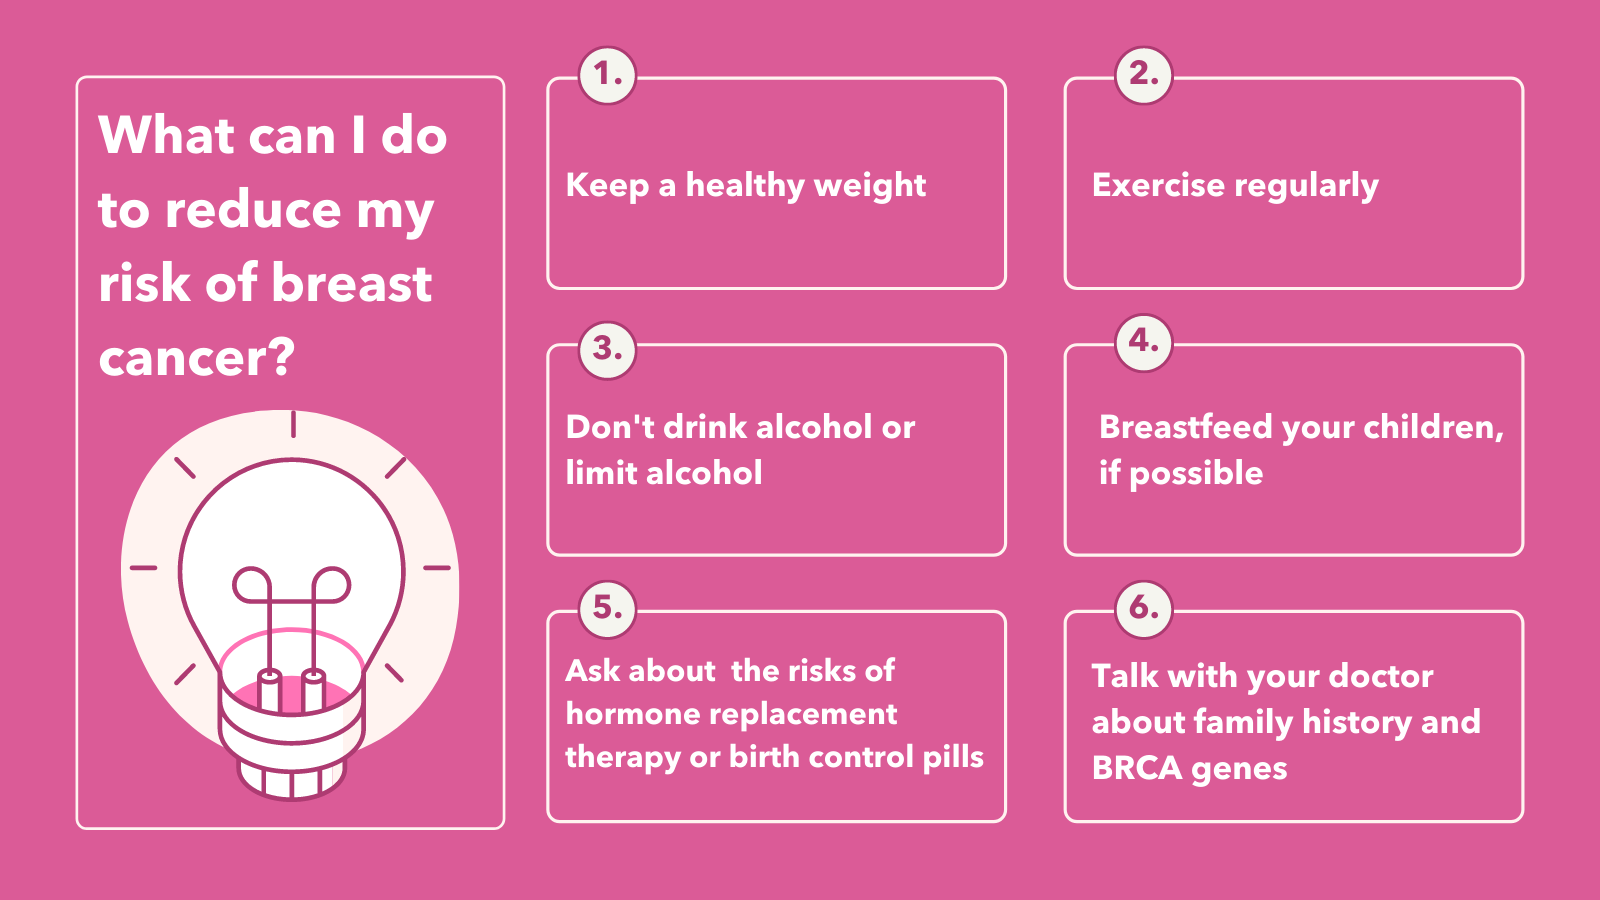 What can I do to reduce my risk of breast cancer?